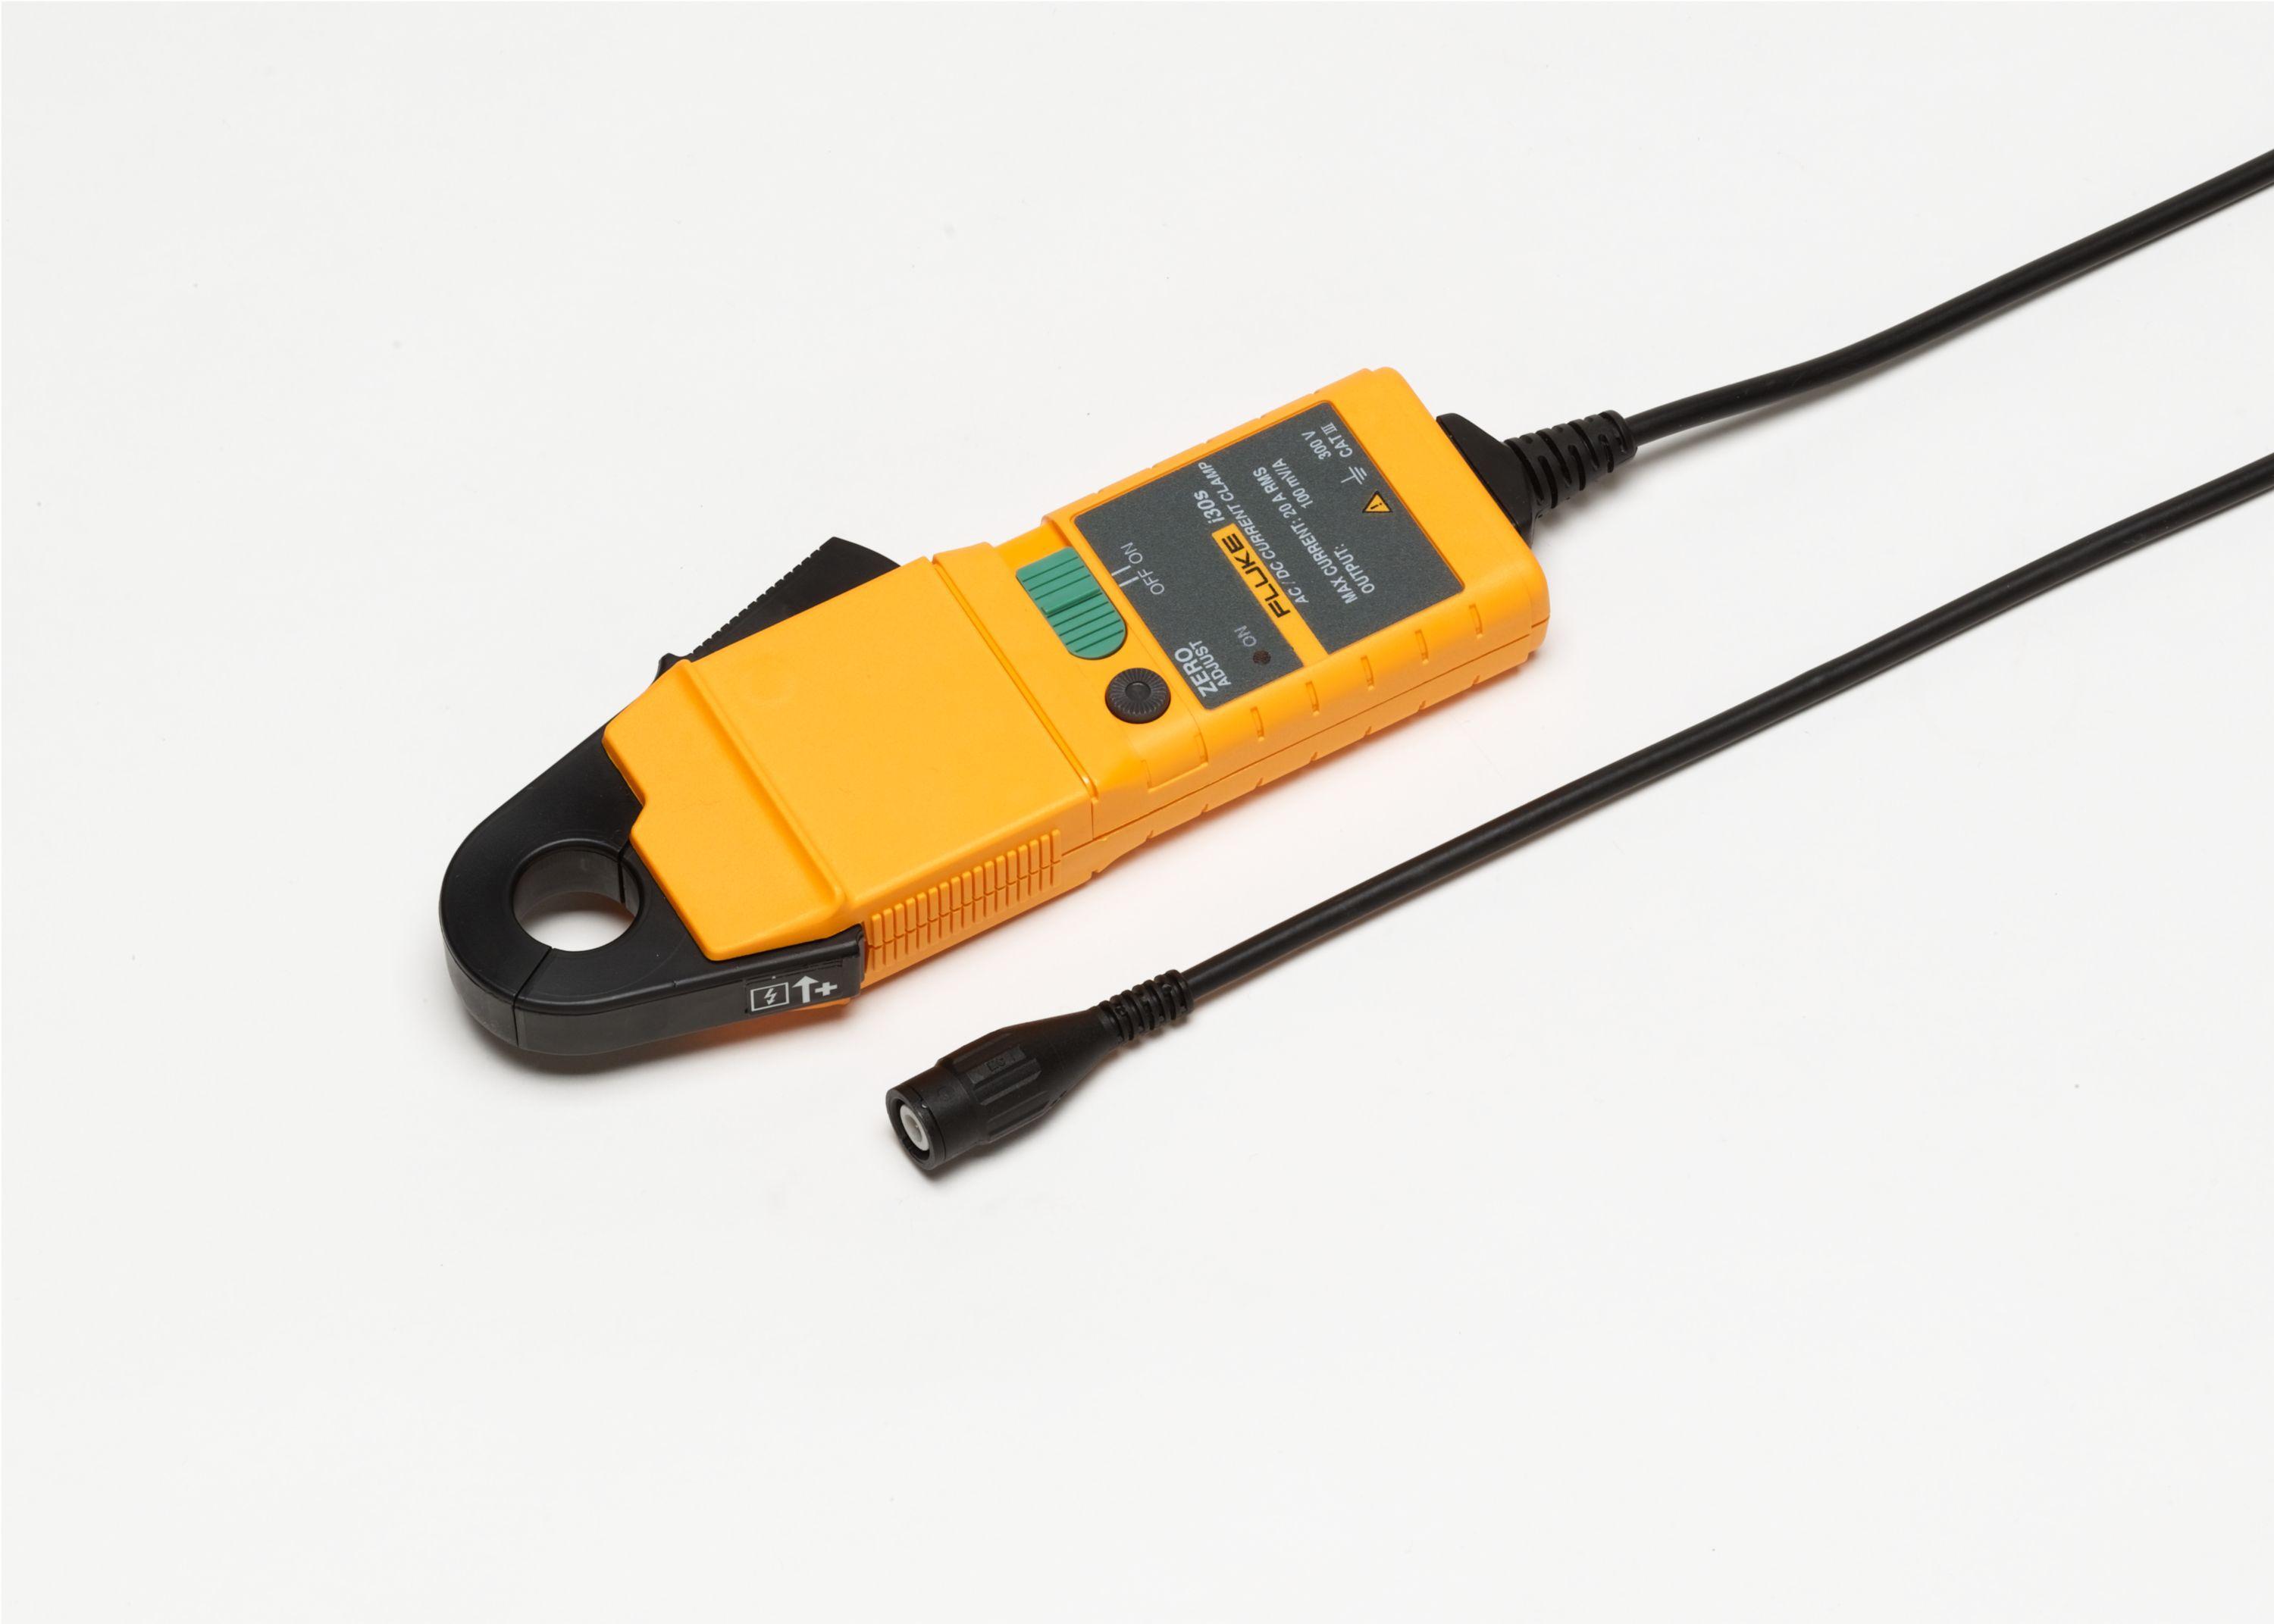 Fluke® MicroScanner2 MS2-100 Cable Verifier, 0.3 m, Monochrome LCD with Backlight Display